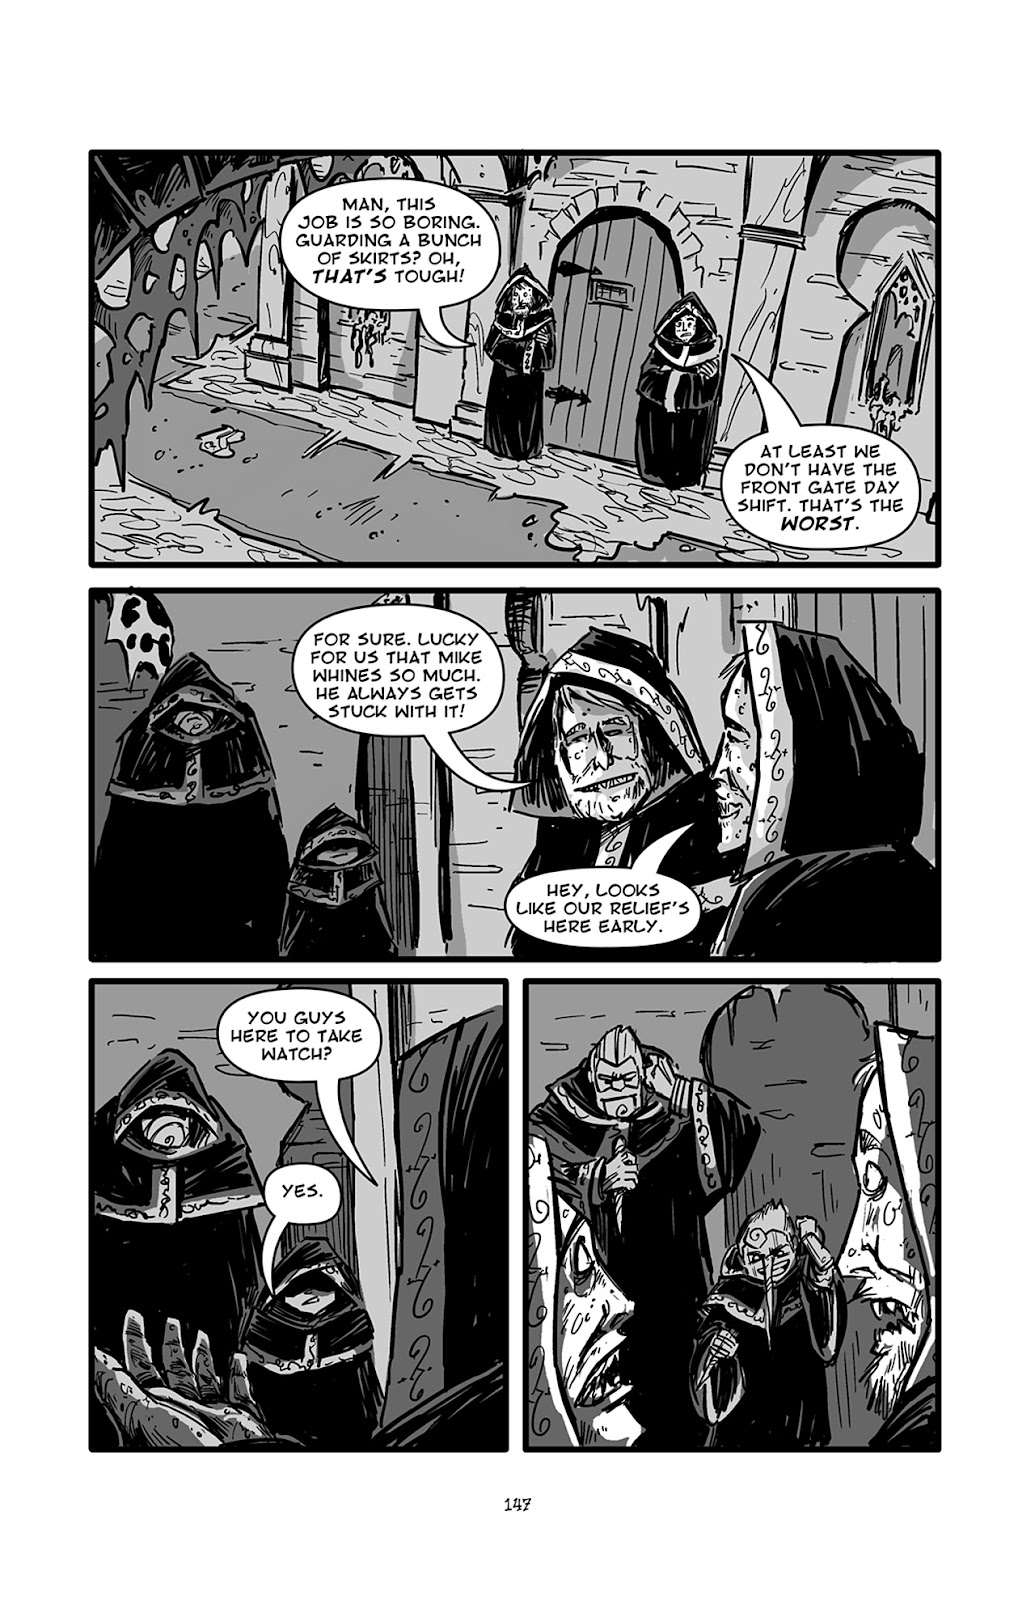 Pinocchio: Vampire Slayer - Of Wood and Blood issue 6 - Page 20